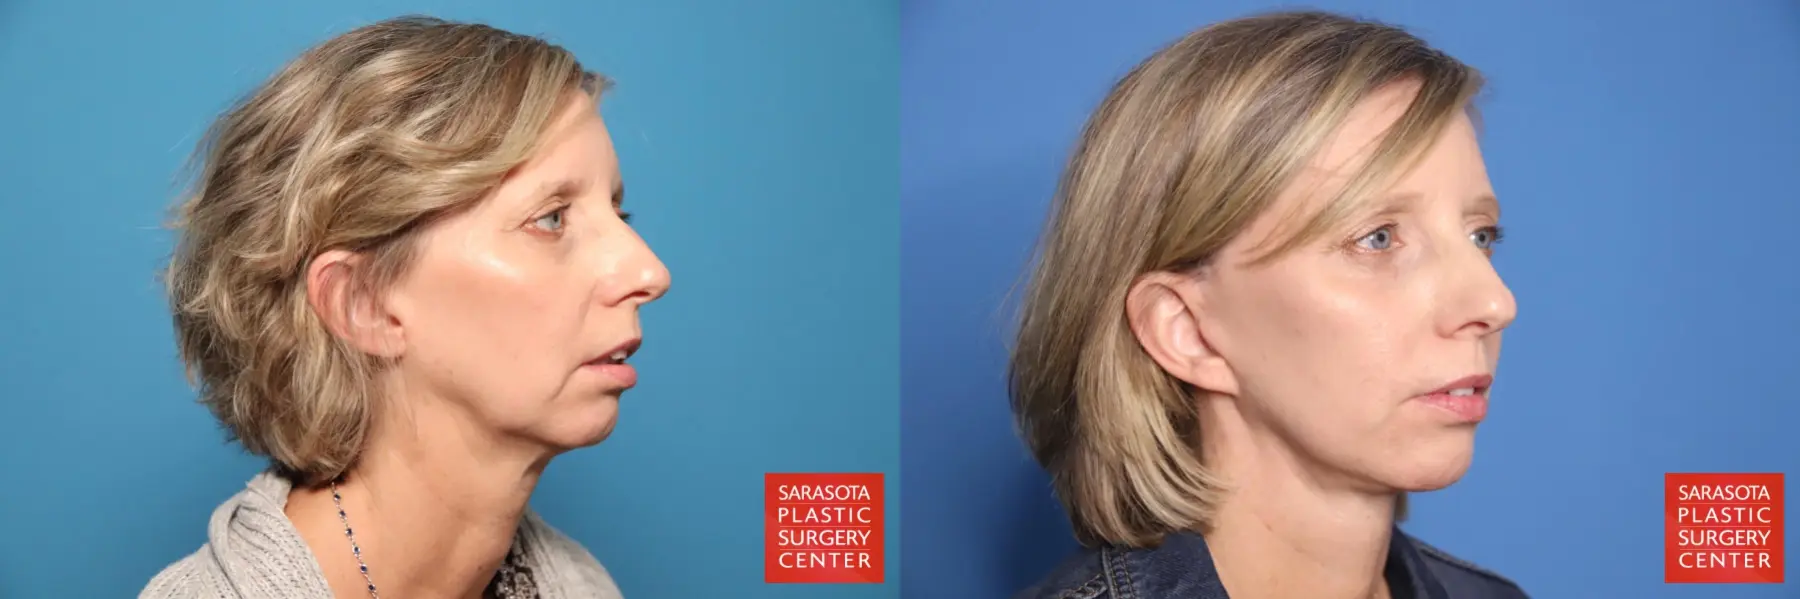 Mini Facelift: Patient 9 - Before and After 2